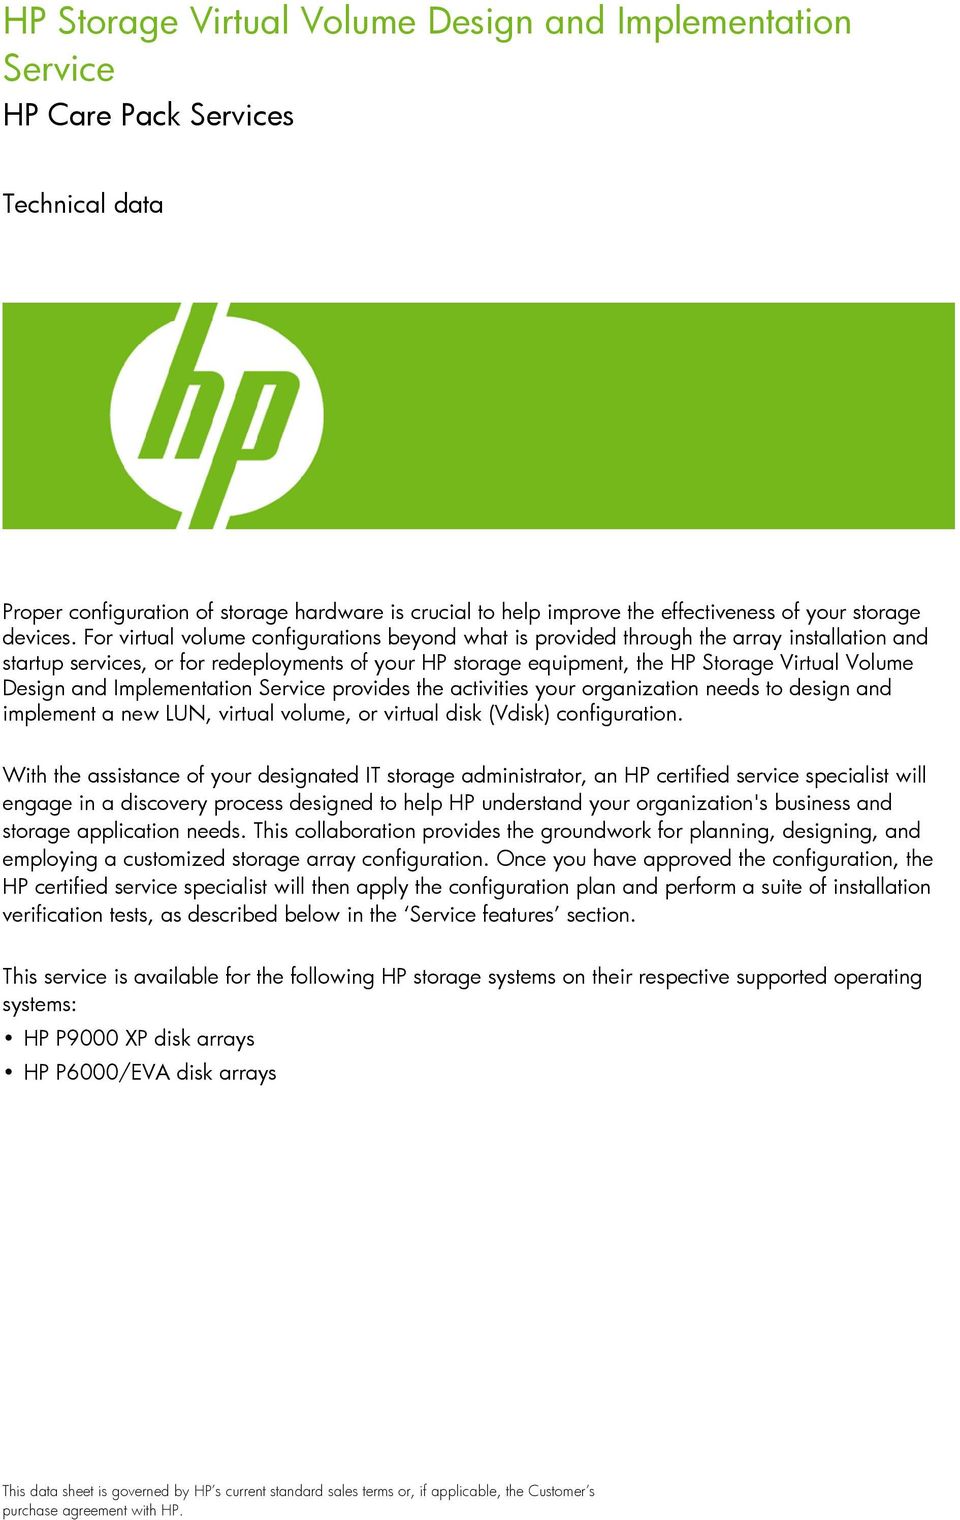 For virtual volume configurations beyond what is provided through the array installation and startup services, or for redeployments of your HP storage equipment, the HP Storage Virtual Volume Design